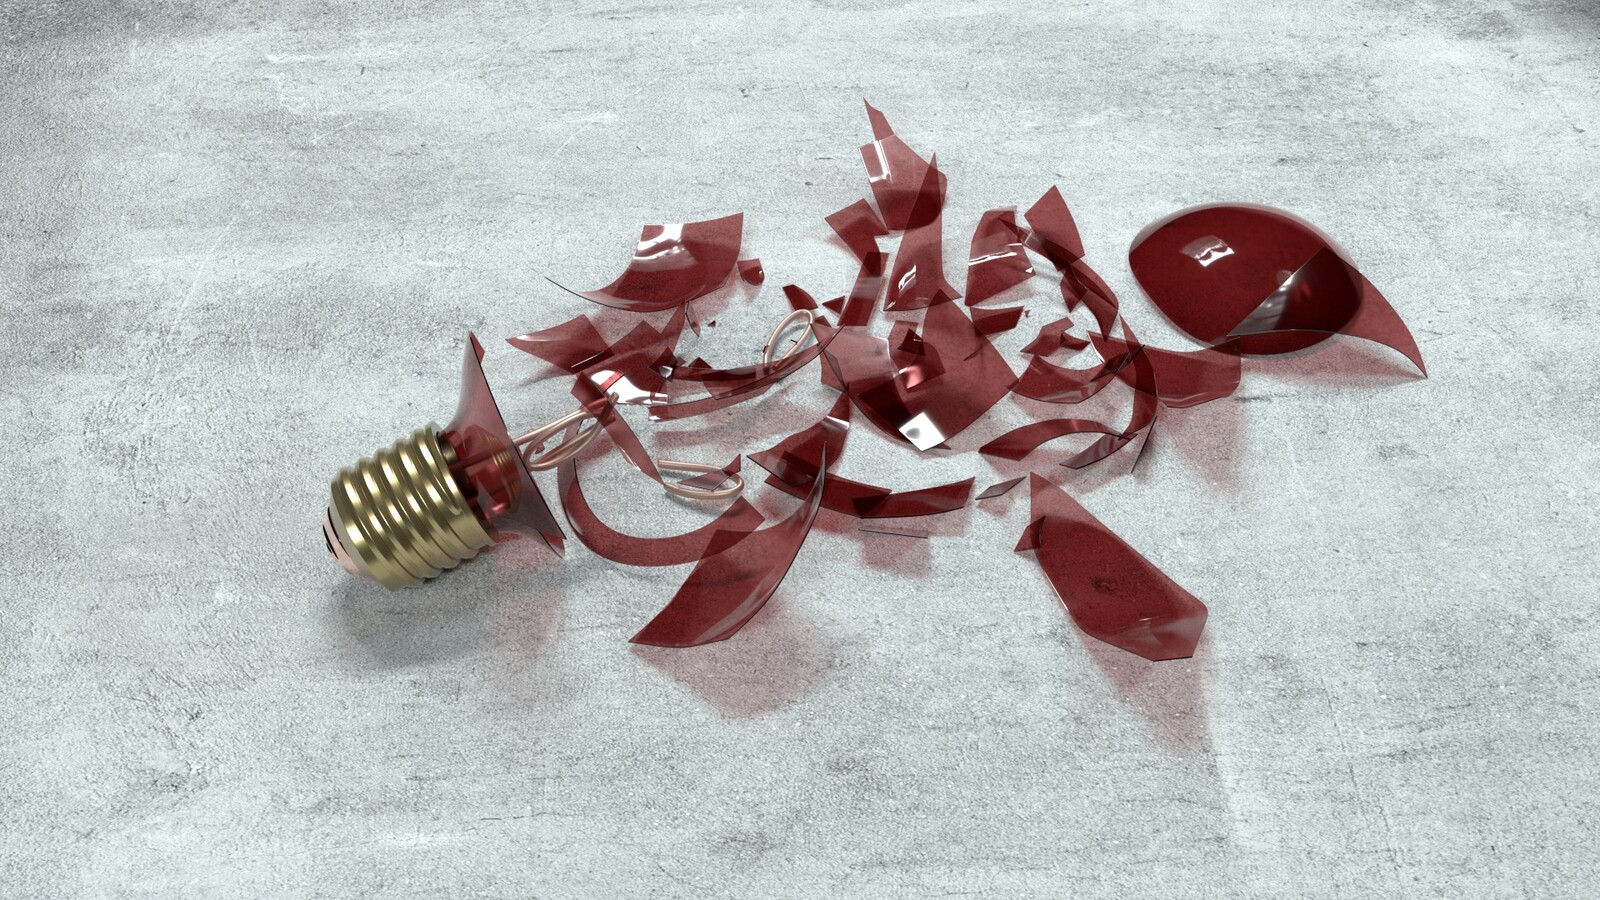 A still frame render of the shaders applied to the Light Bulb.